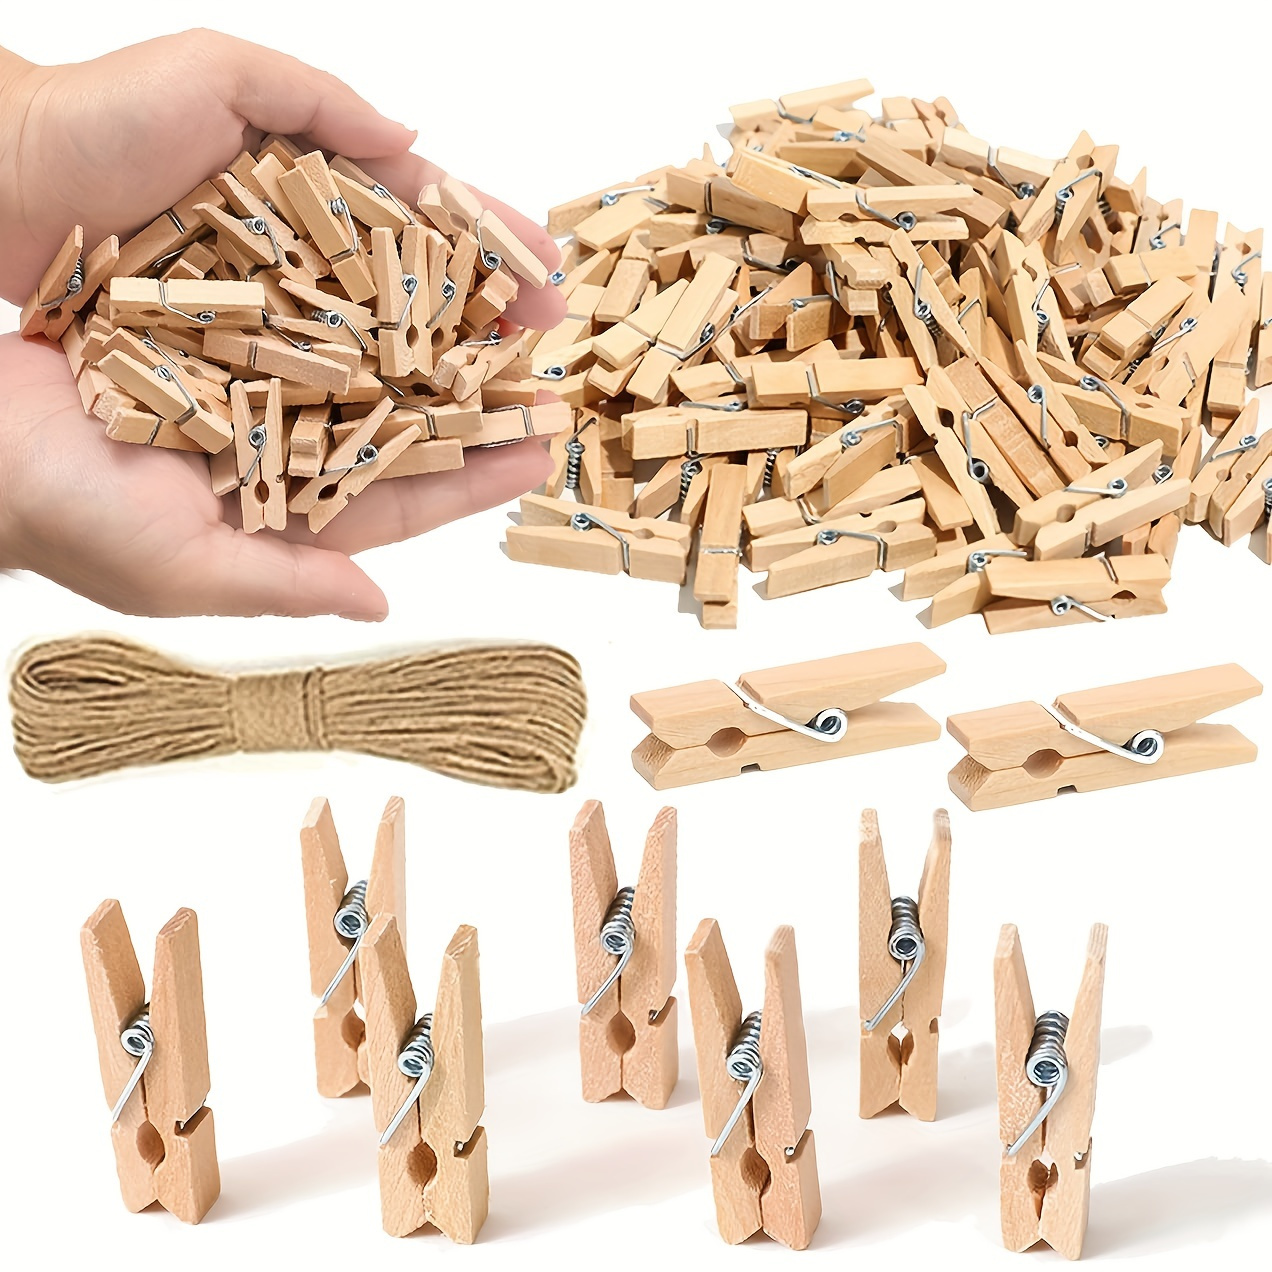 20 Pcs Colorful Clothespins Clothes Pins Wooden - Small Mini Clothespins  for Photos Pictures Crafts Color Close Pin Wood Clothing Chip Clip  Decorative Tiny Photo Clips Decoration Clips - 10 ColorsB 